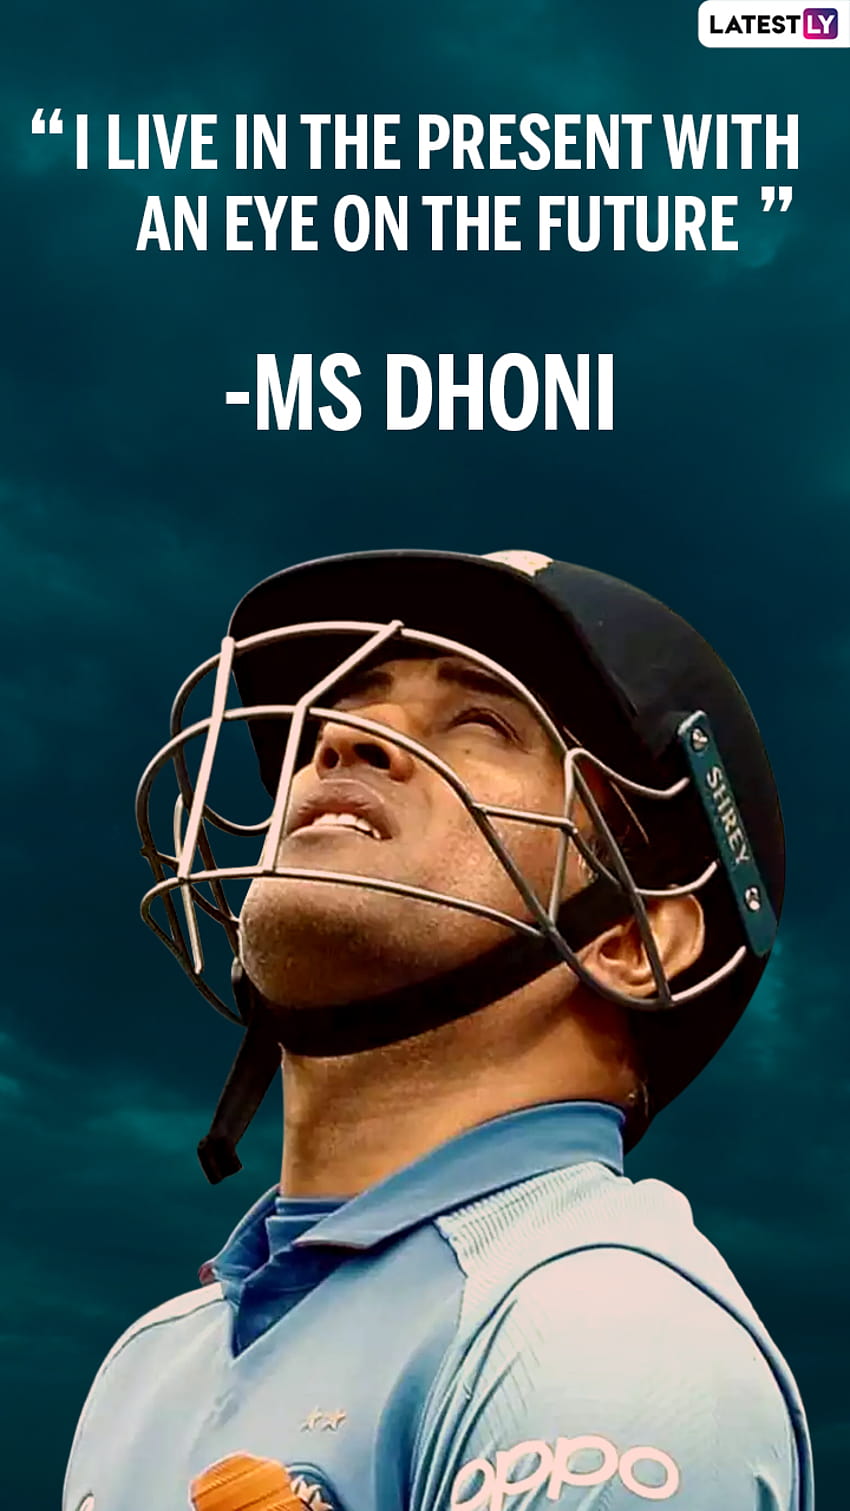 MS Dhoni Quotes & : Celebrate Mahendra Singh Dhoni's 40th Birtay With His Incredible Words, cricket quotes HD phone wallpaper